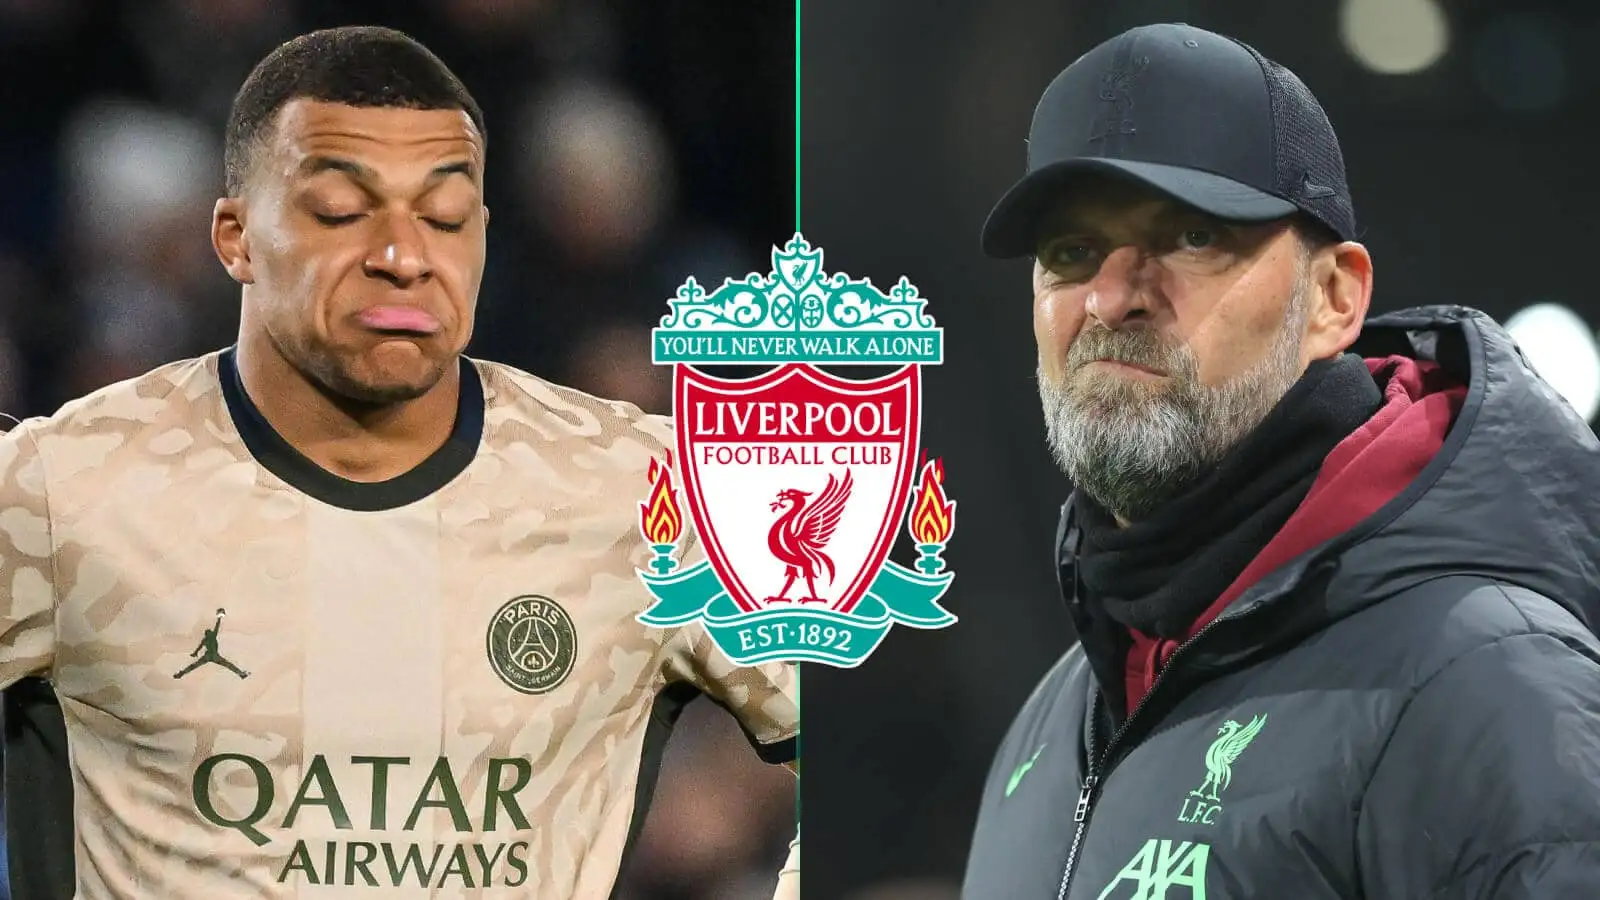 Kylian Mbappe and Jurgen Klopp either side of the Liverpool badge